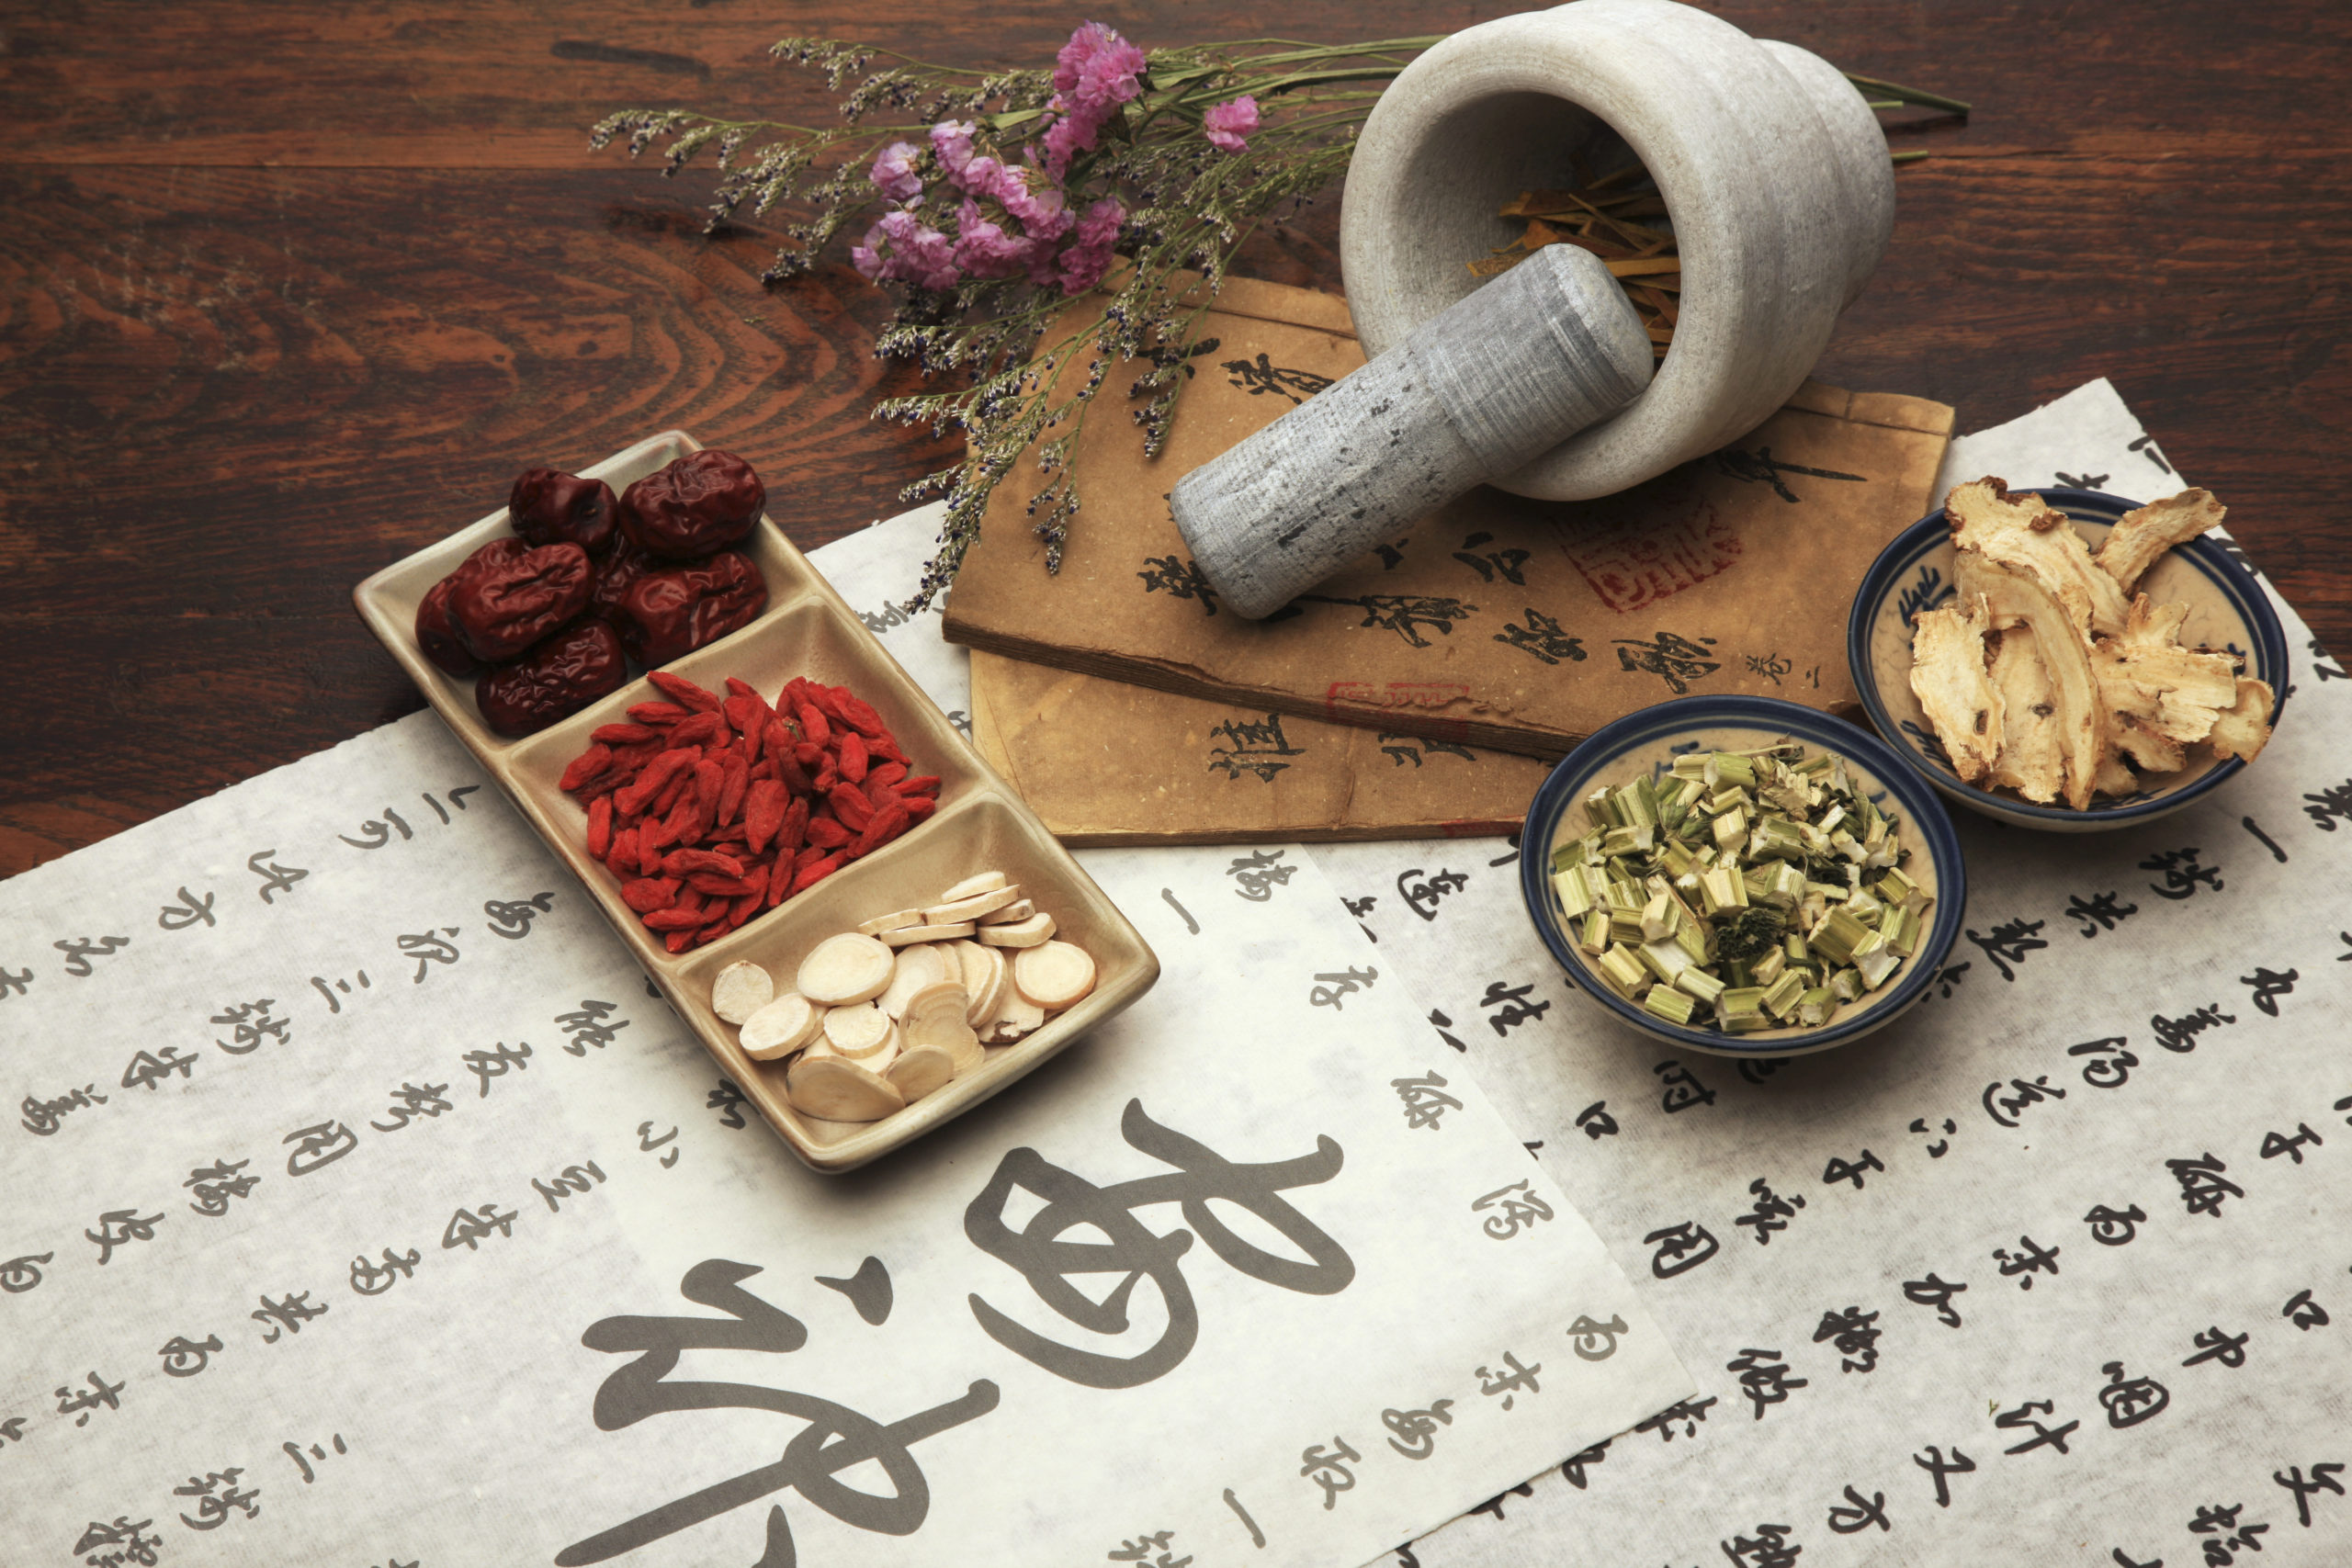 Practice makes perfect – advice on learning Chinese herbs